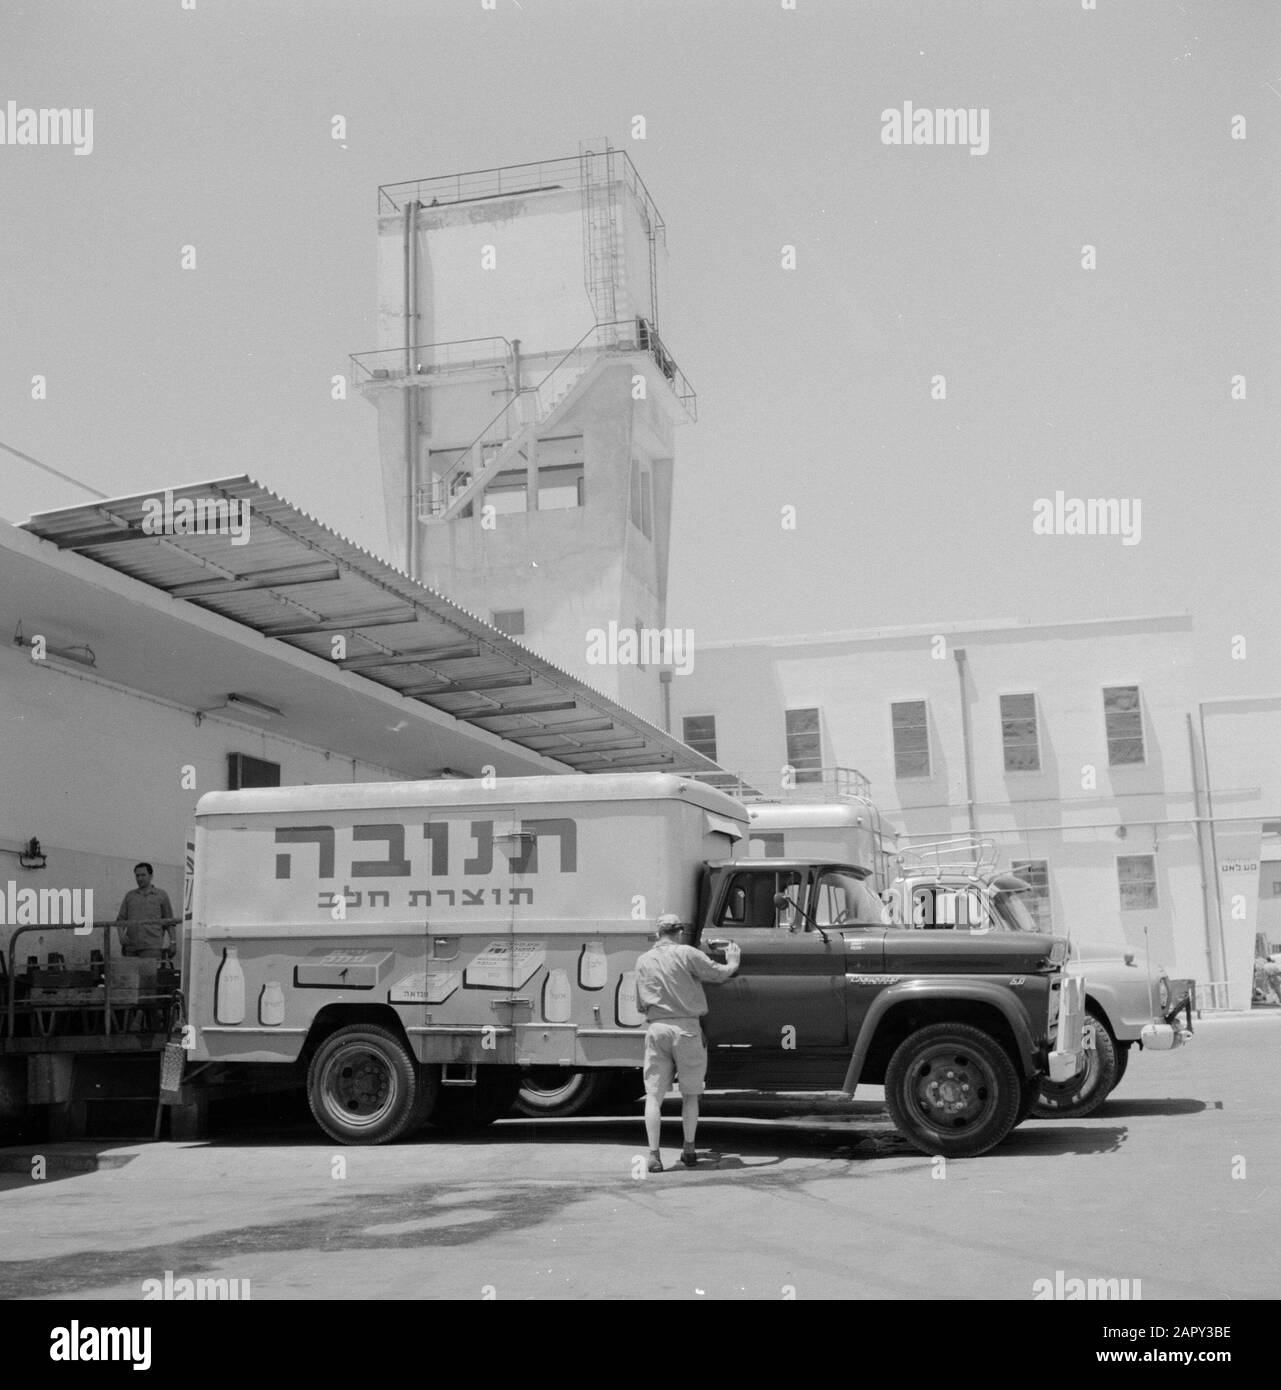 Dairy Tnuva. Truck at the factory building Date: 1 January 1964 Location: Israel Keywords: factories, industry, advertising, trucks Stock Photo